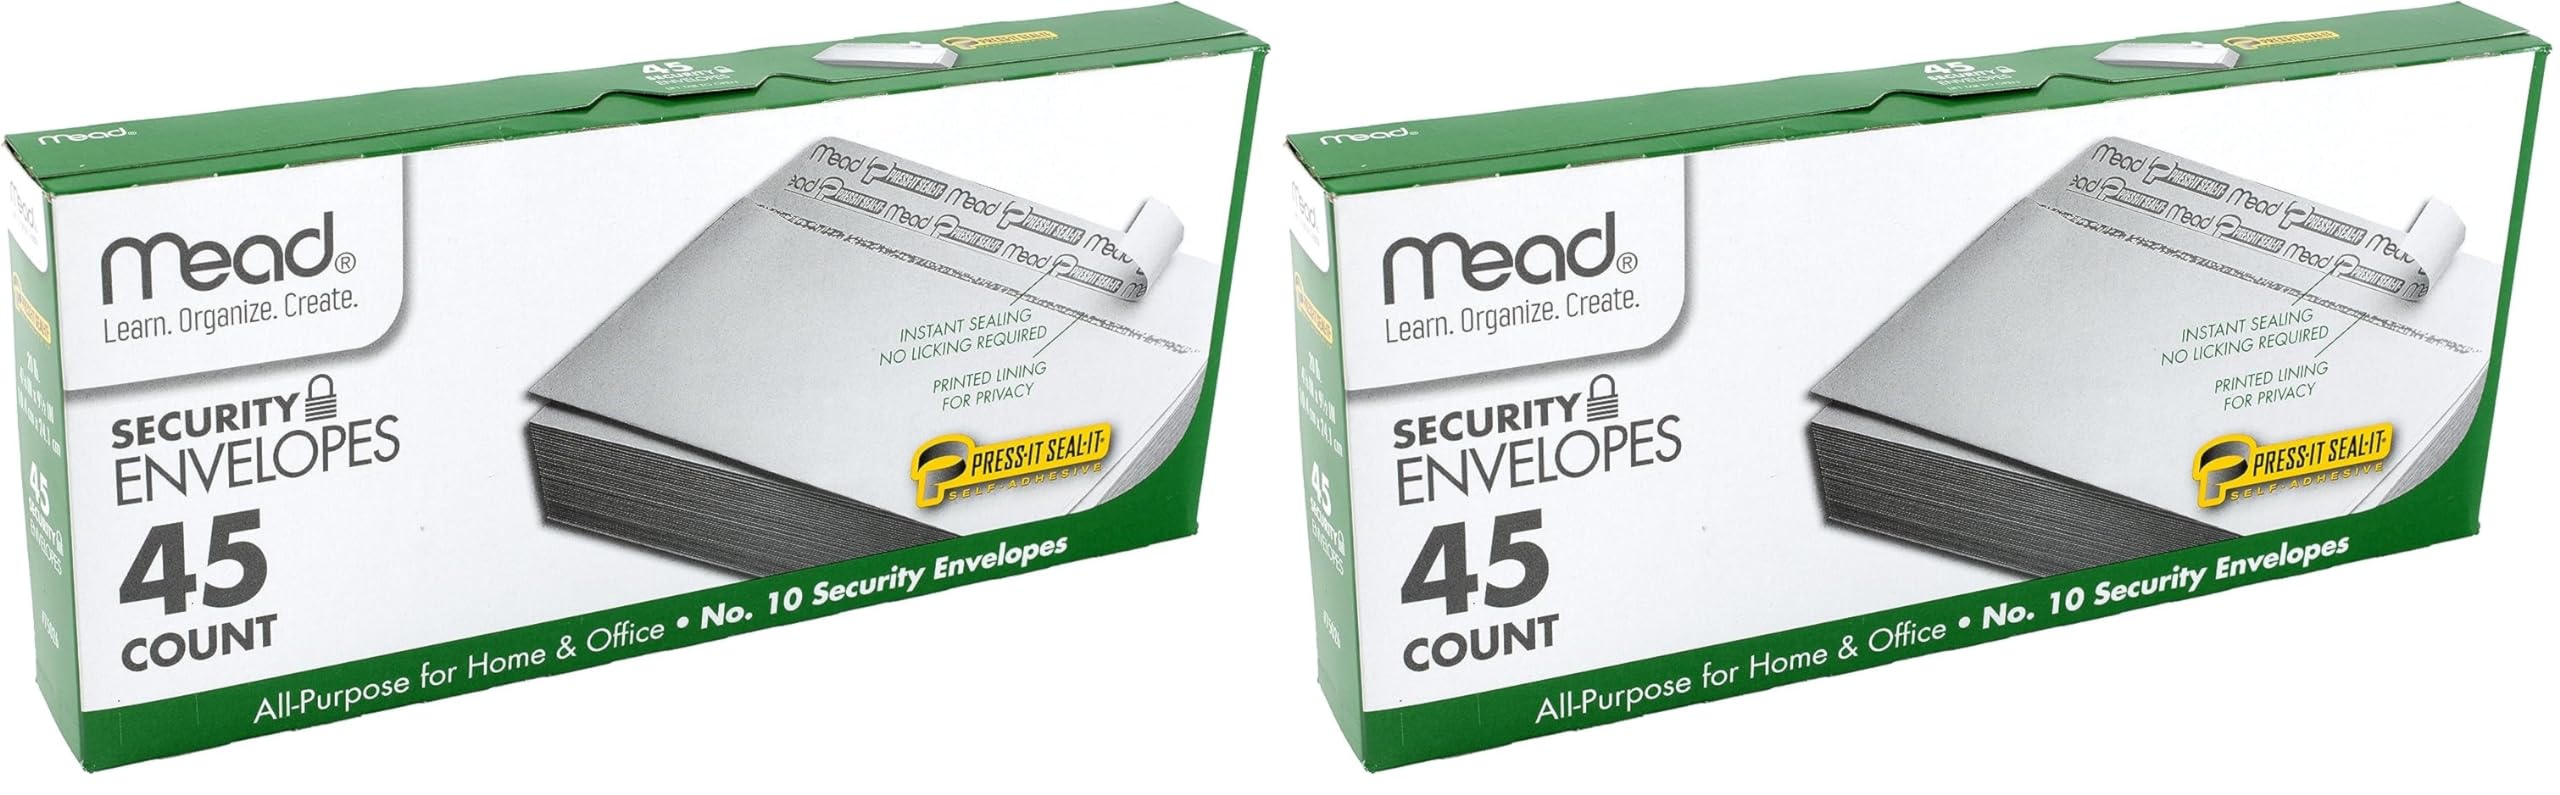 Mead #10 Envelopes, Security Printed Lining for Privacy, Press-It Seal-It Self Adhesive Closure, All-Purpose 20-lb Paper, 4-1/8" x 9-1/2", White, 45 per Box (75026) - Pack of 2